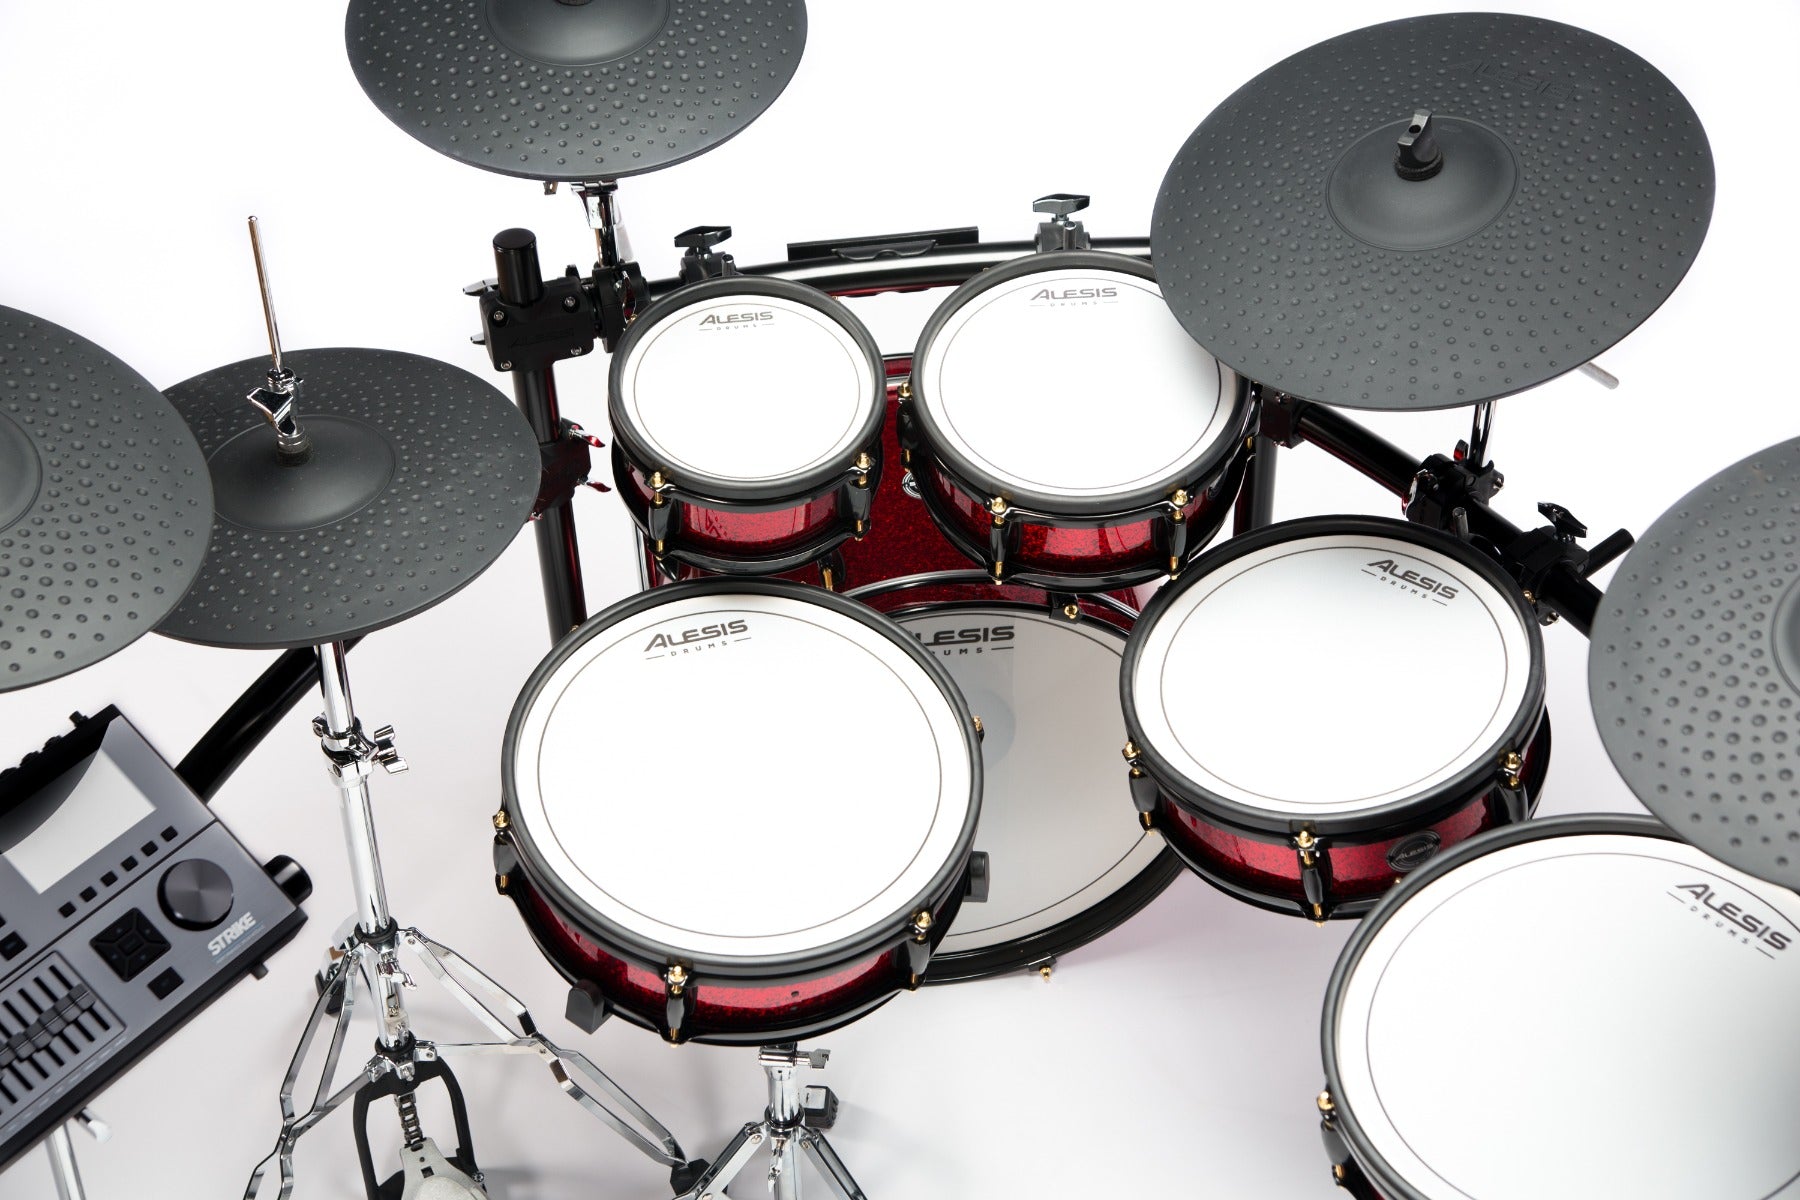 Image of the Alesis Strike Pro Kit Special Edition Electronic Drum Set top view